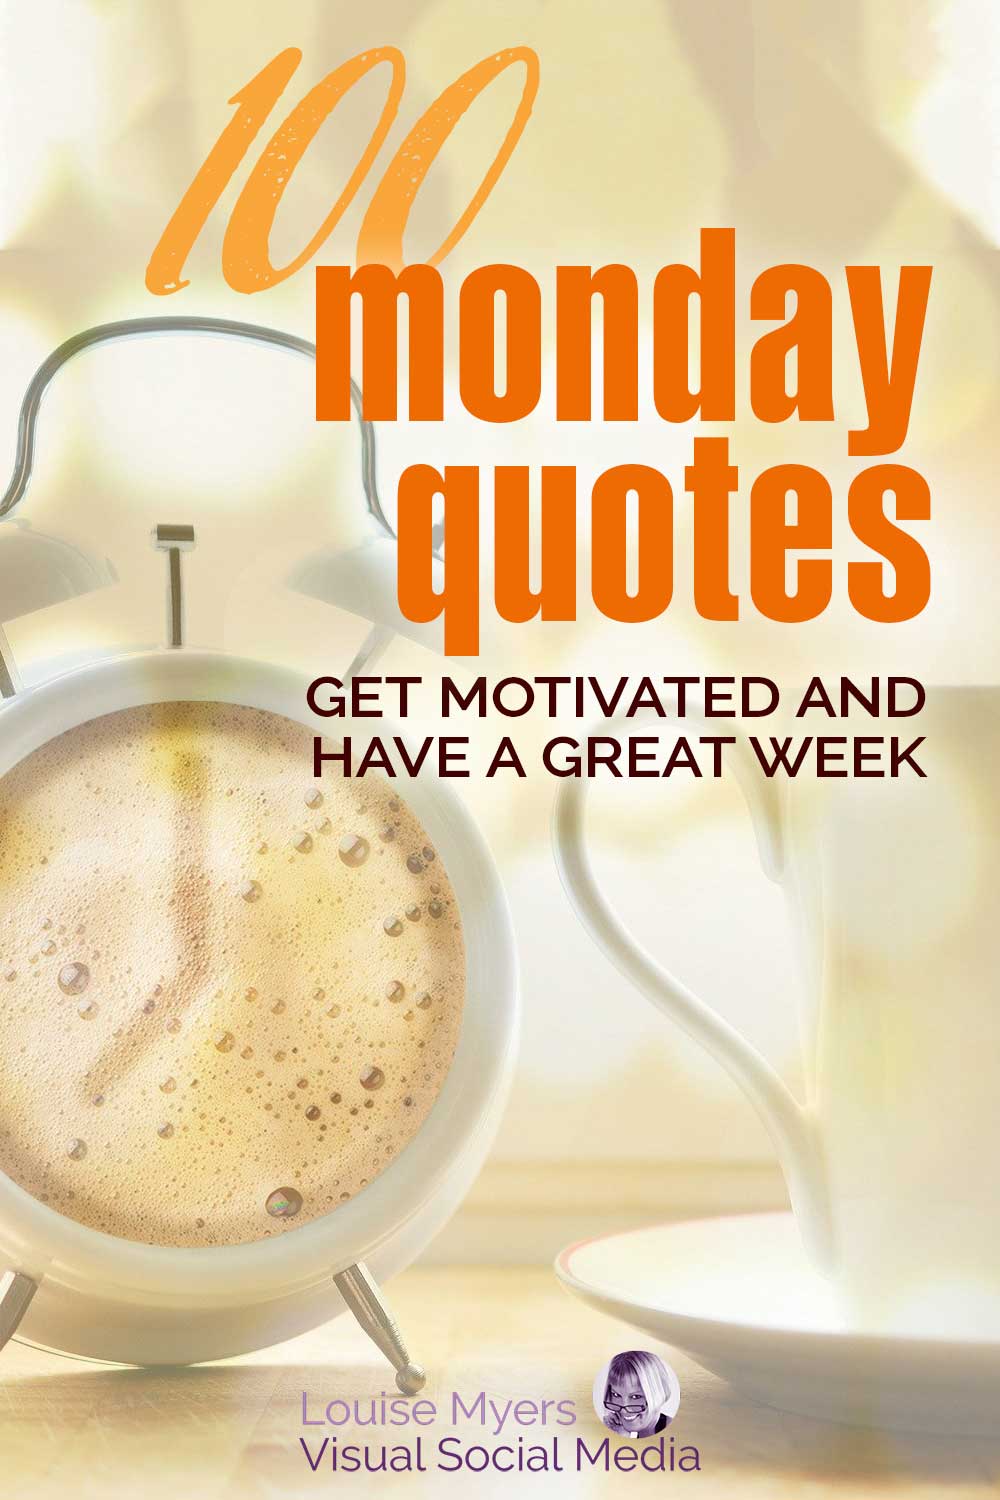 soft backlit image of alarm clock and coffee cup says 100 monday quotes to get motivated and have a great week.